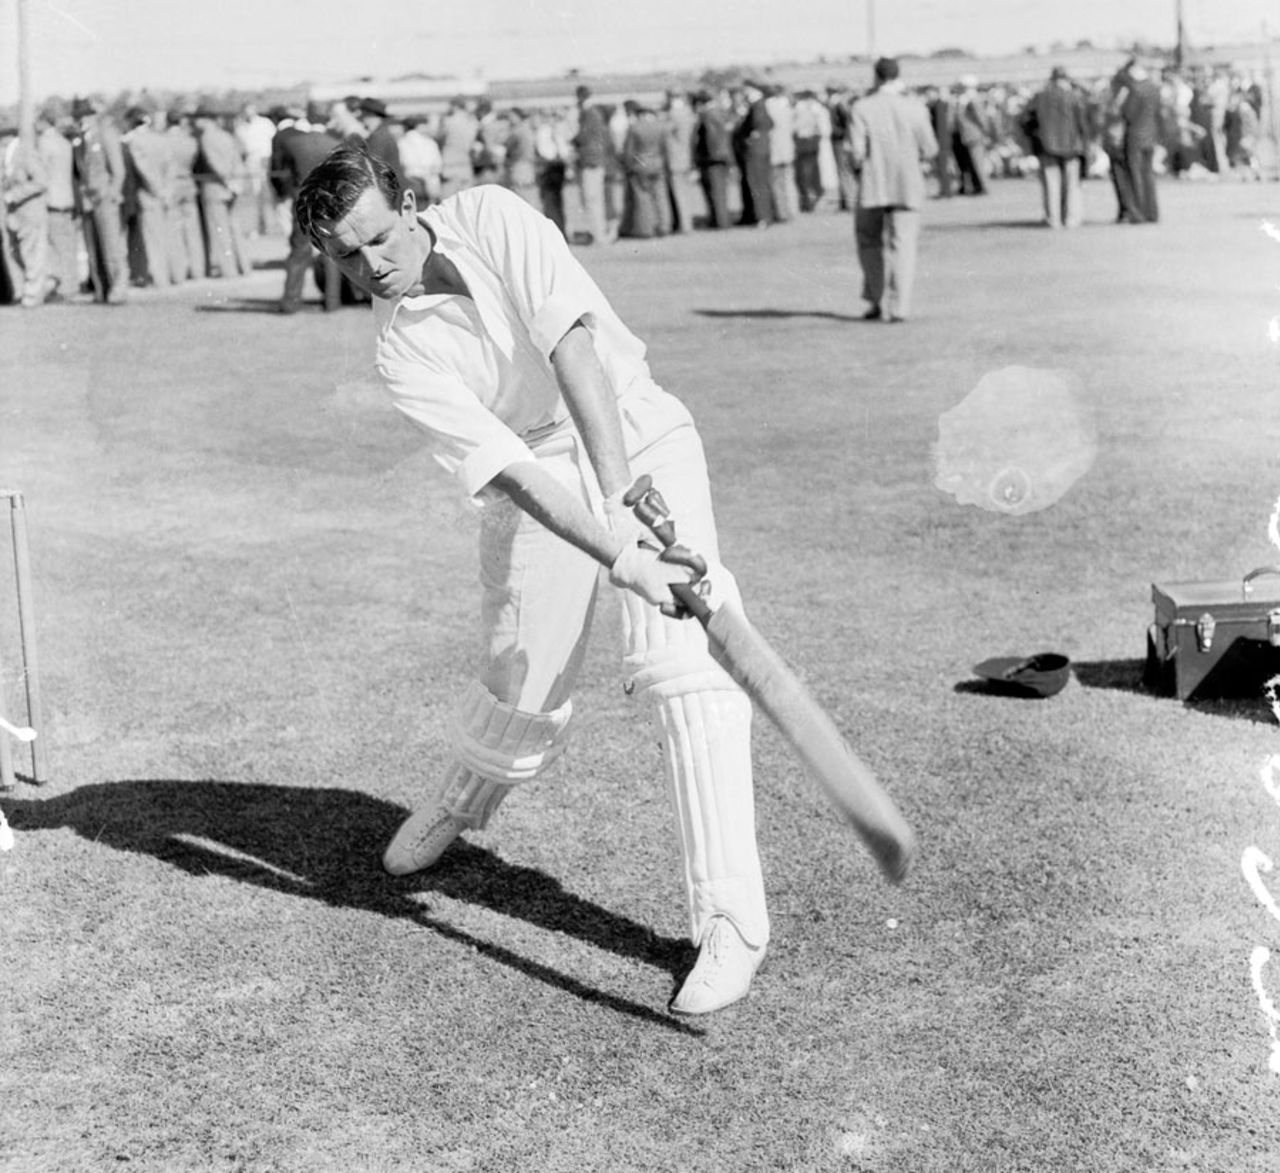 Tom Graveney practises his batting at the nets, Perth, October 11, 1954